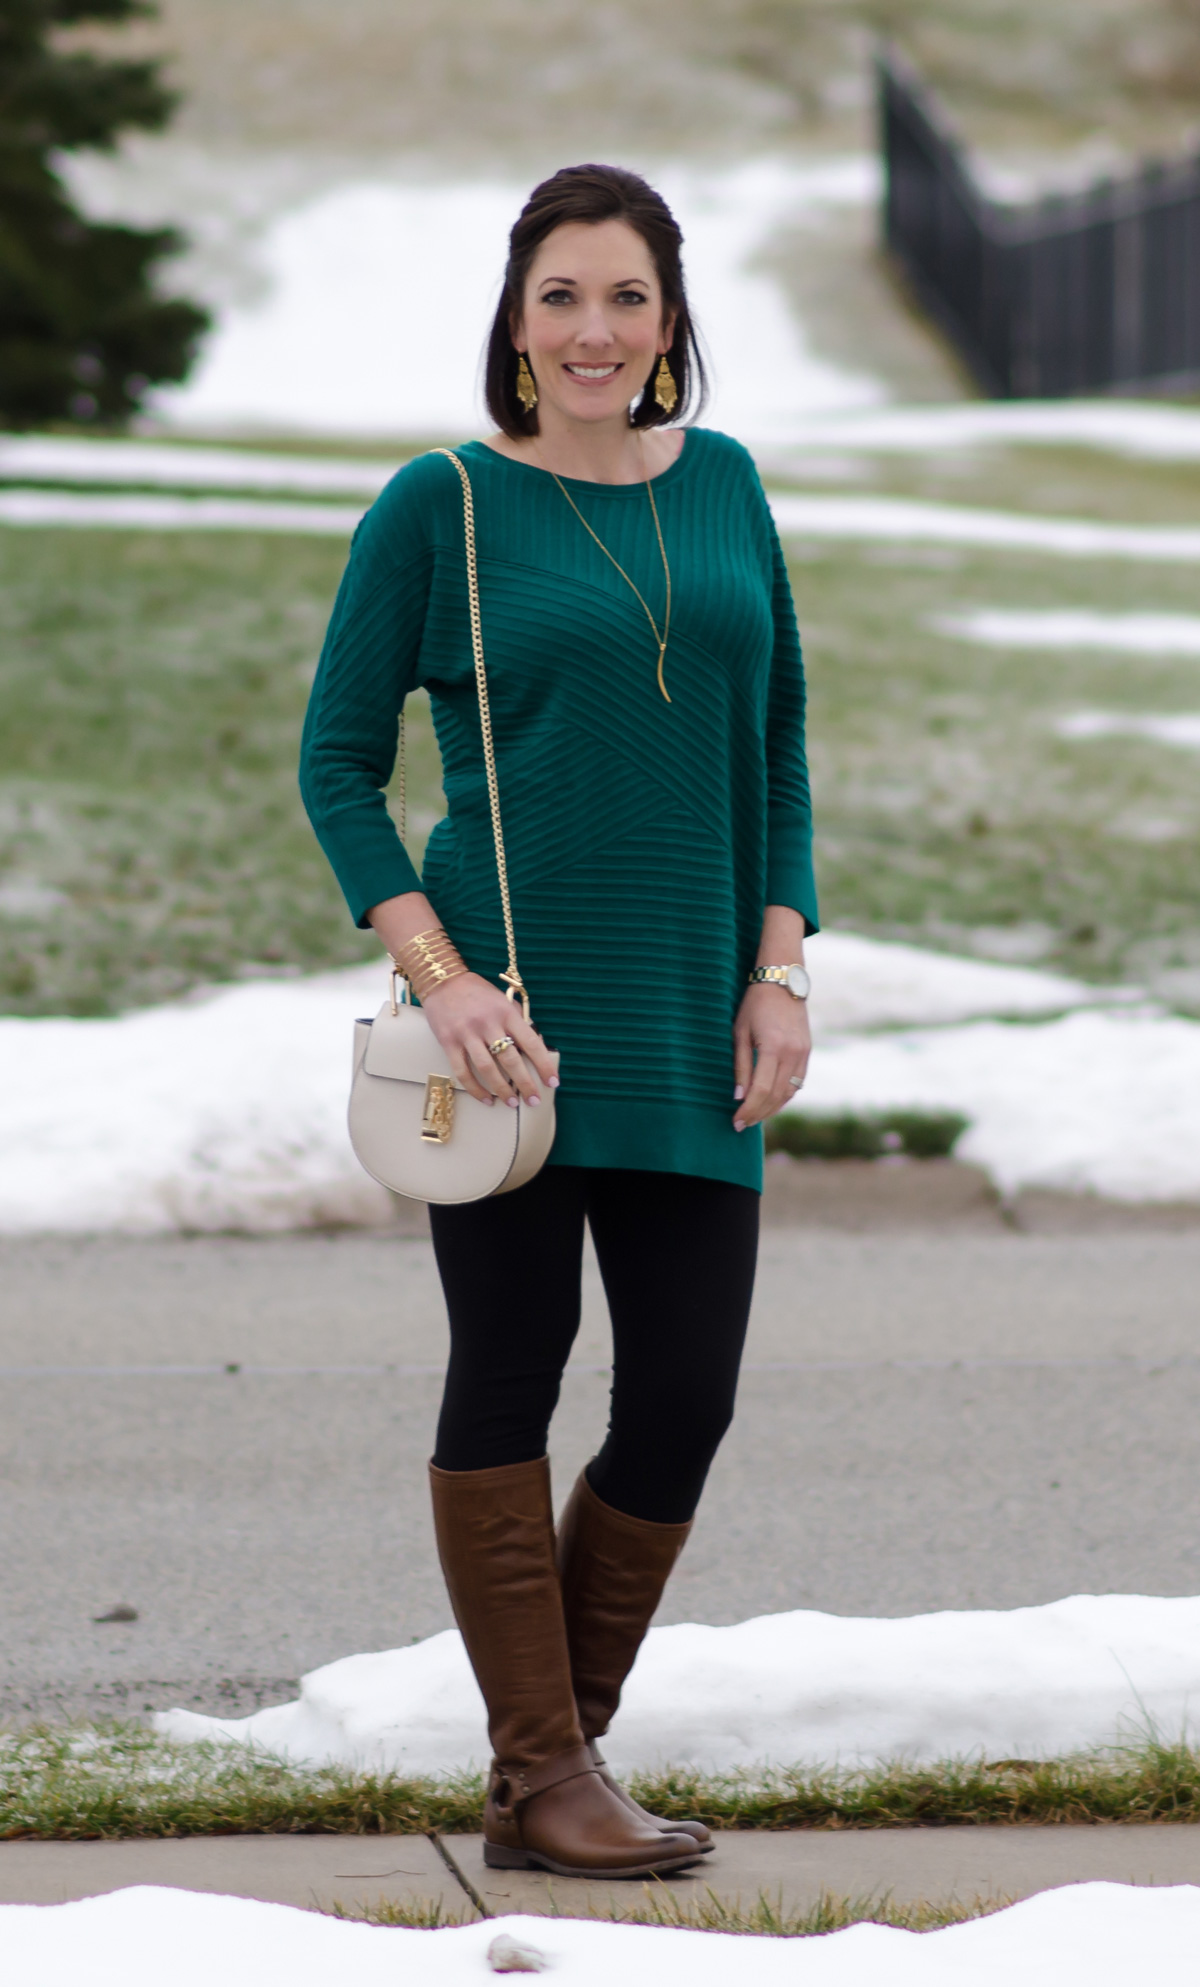 How to Wear Brown Boots with Black Based Outfits: Brown Riding Boots with Black Leggings and a Tunic Sweater in a rich Jewel Tone